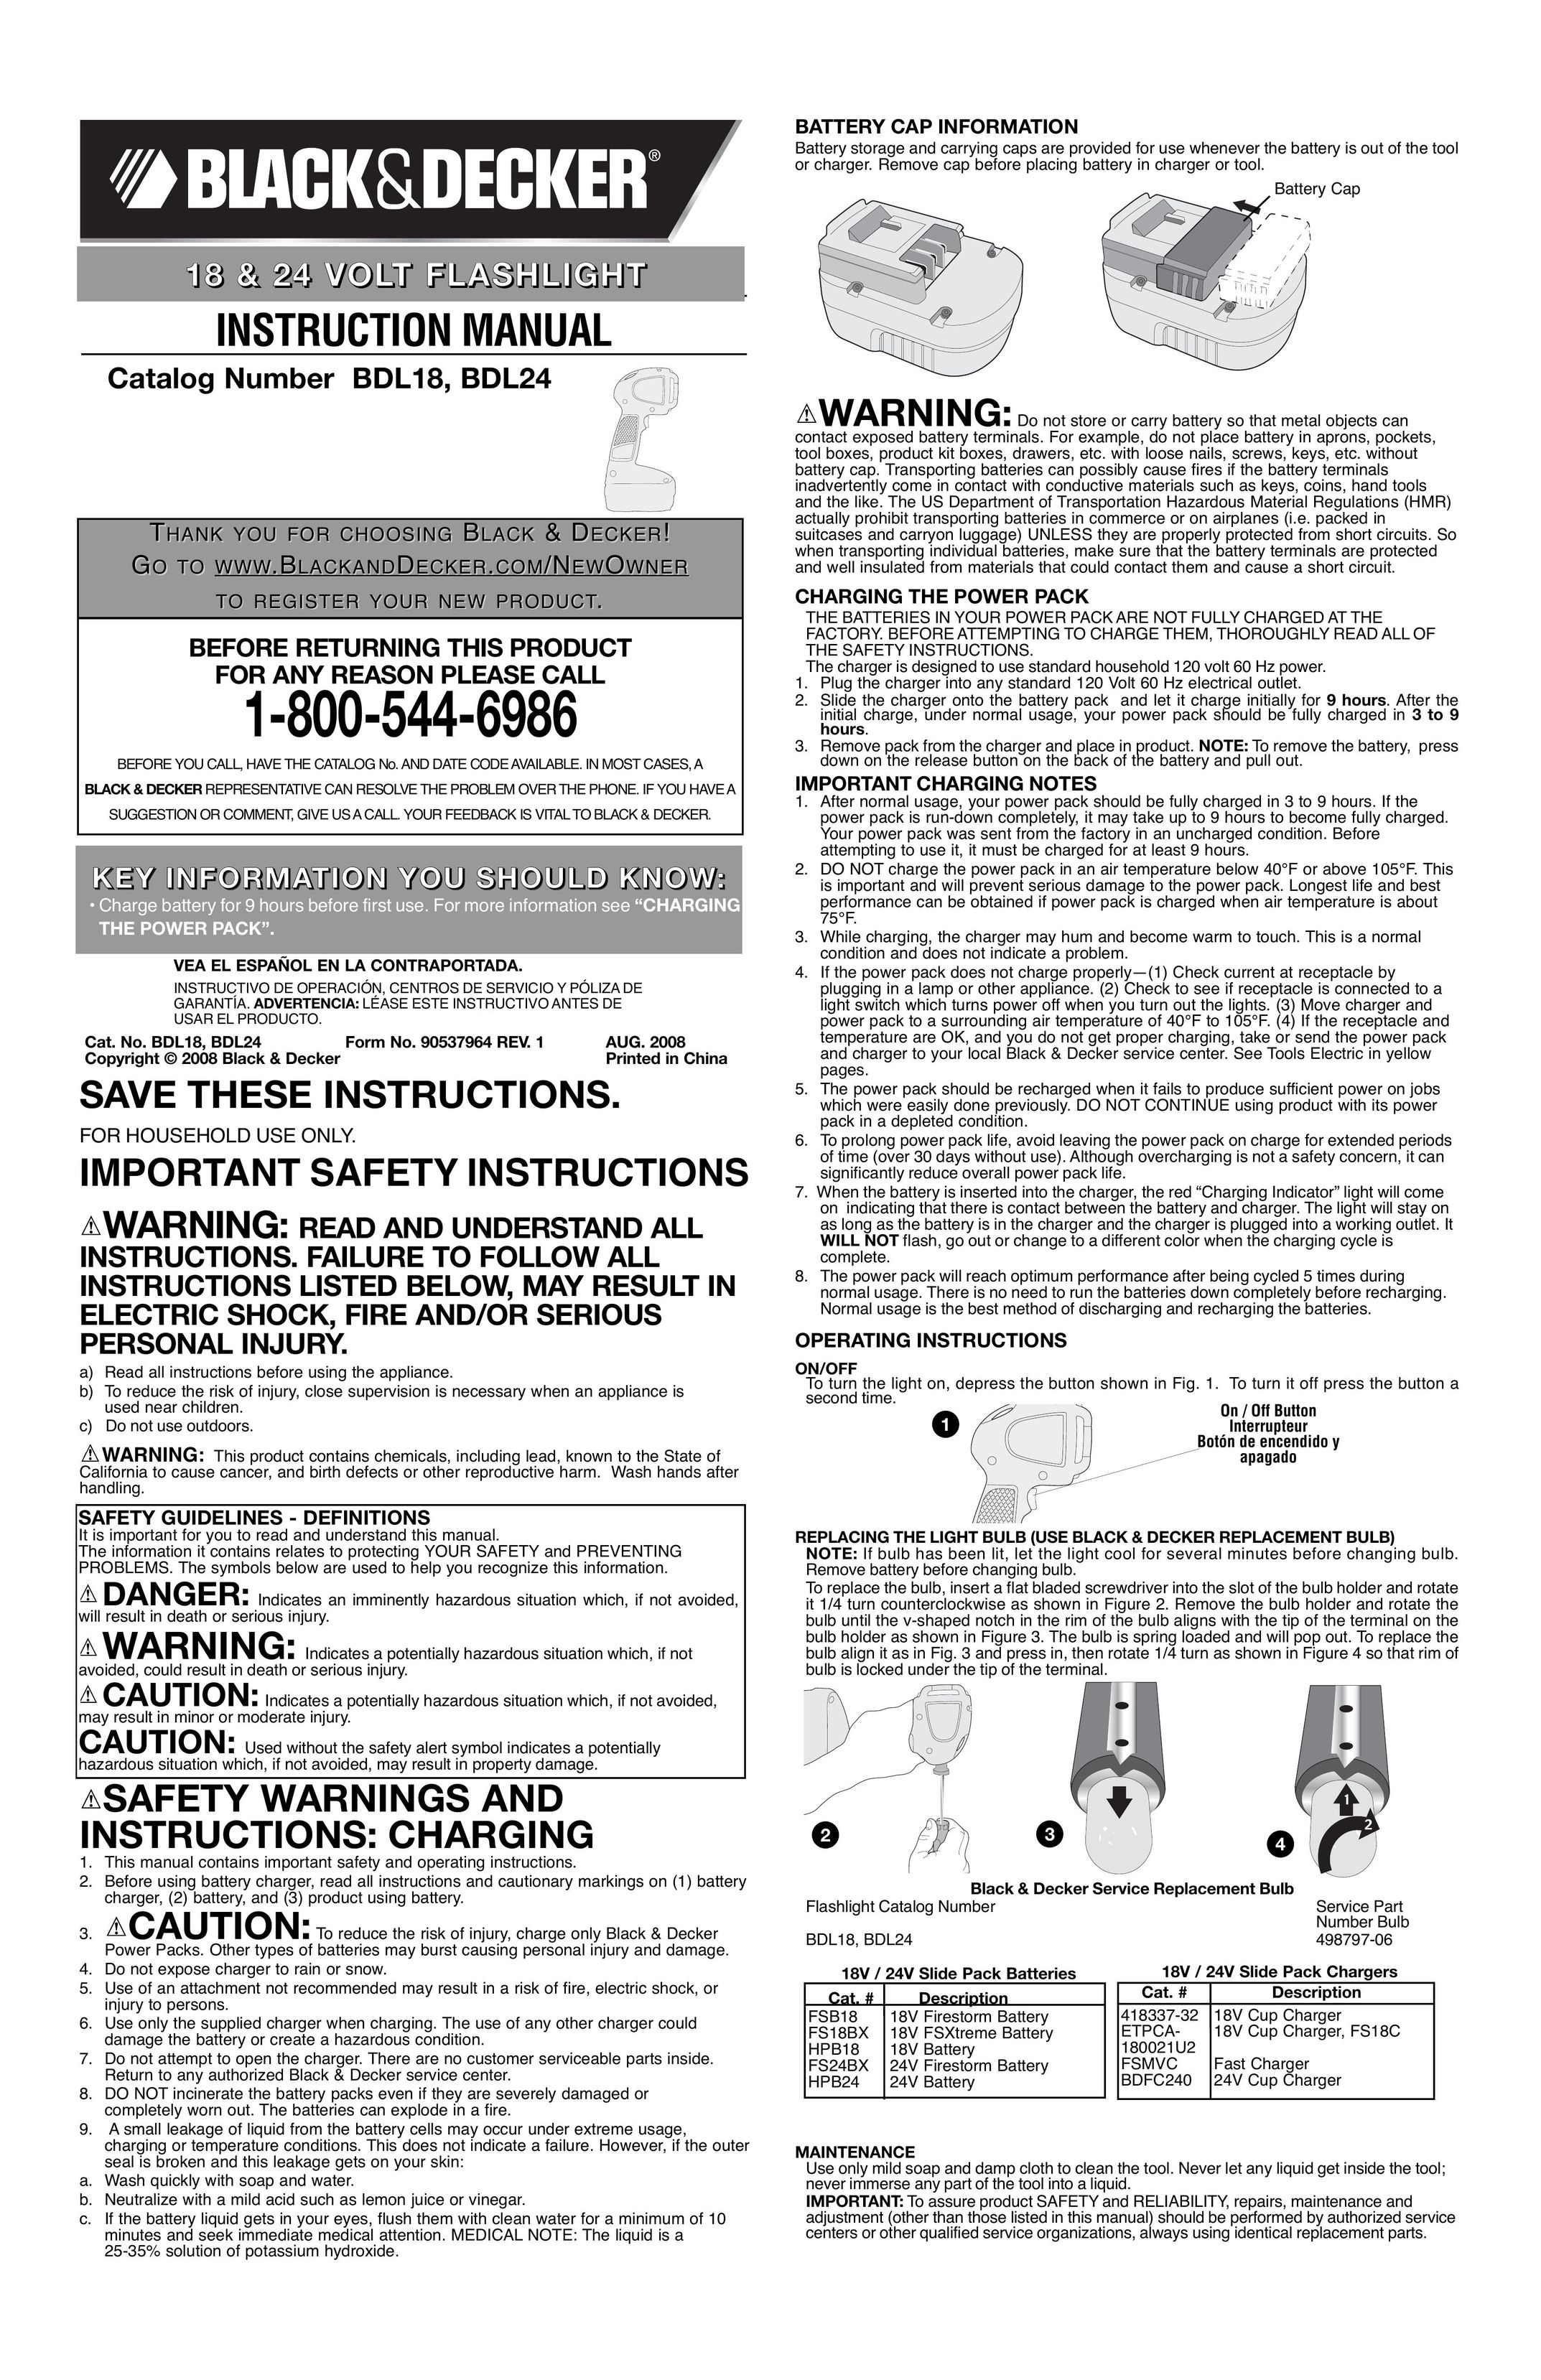 Black & Decker BDL24 Home Safety Product User Manual